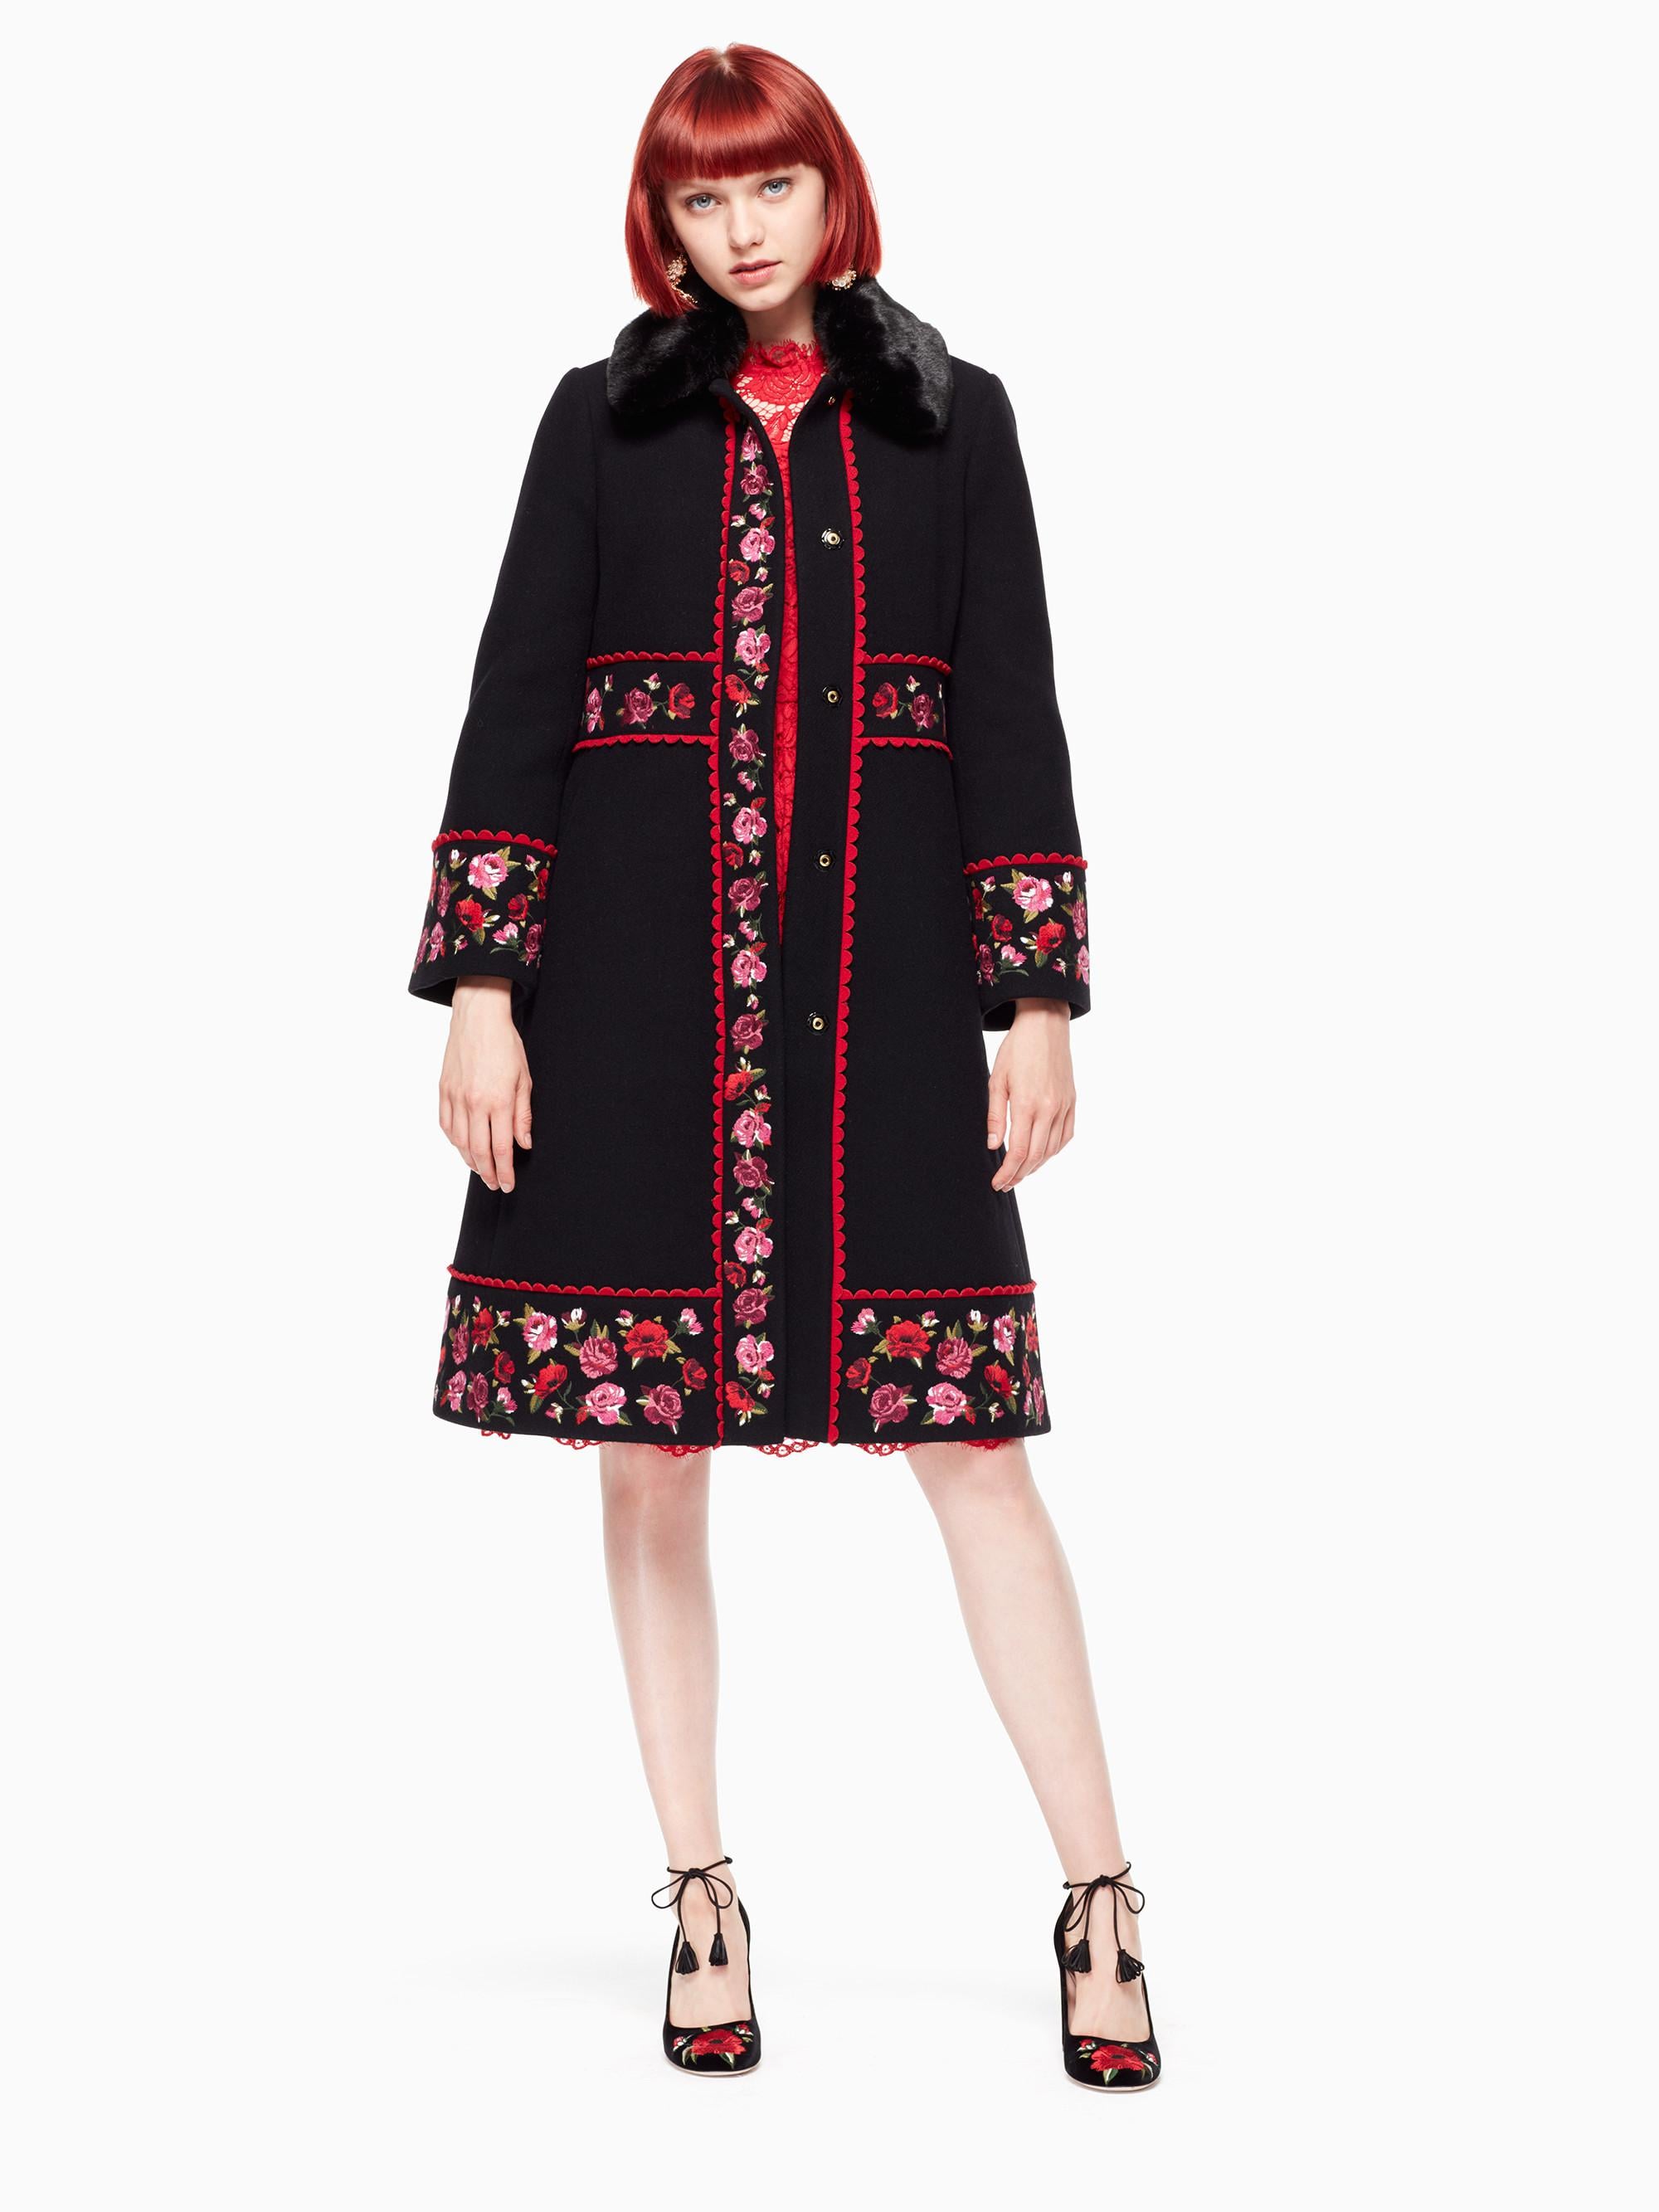 Kate Spade Lanni Coat | Hillary Clinton Should Be Crowned Queen of Coats  With This 1 Look | POPSUGAR Fashion Photo 5